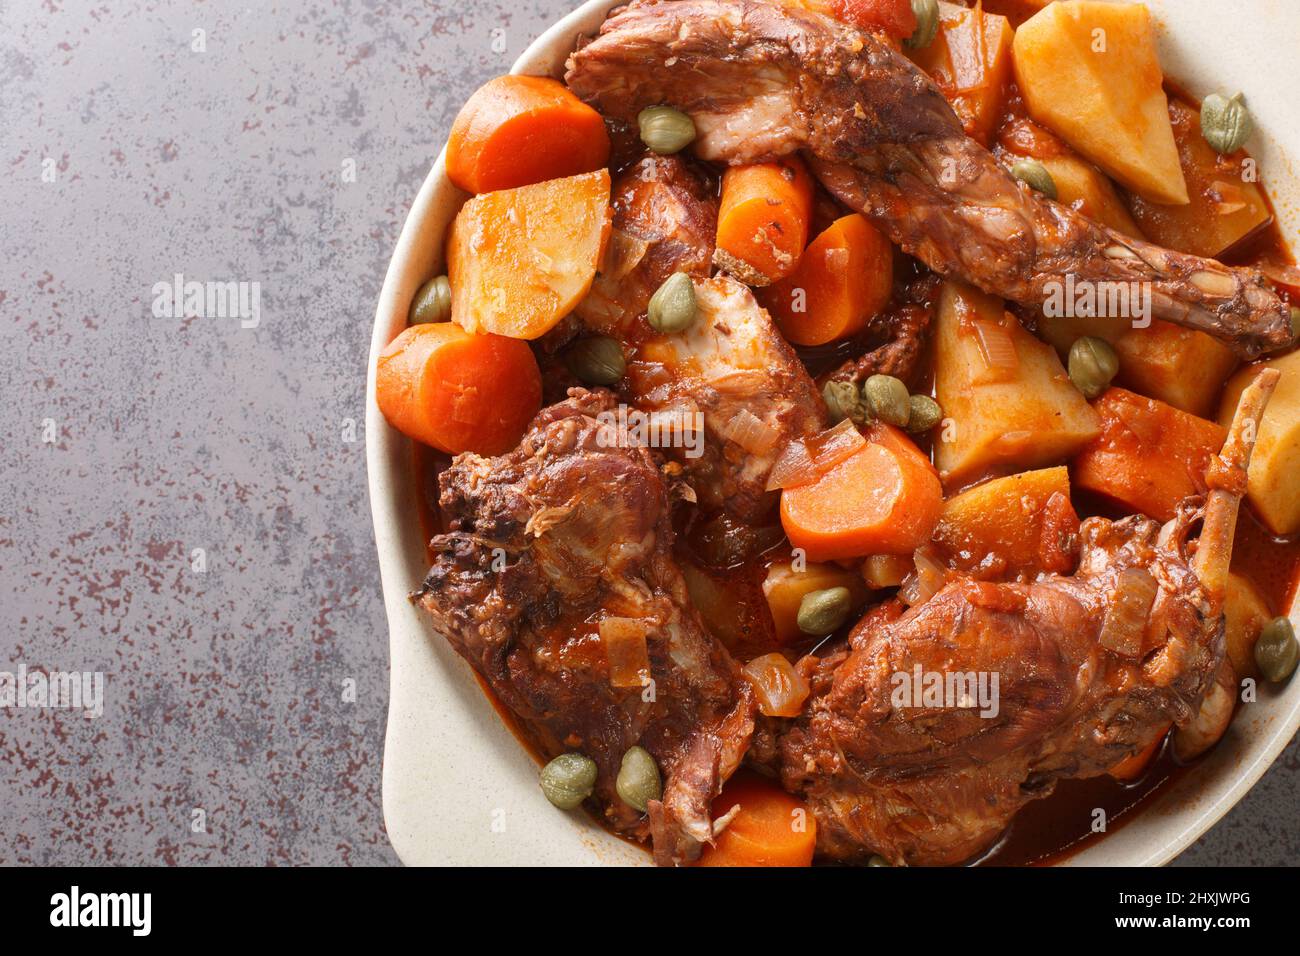 Rabbit Stew Maltese style or Stuffat tal-Fenek closeup in the pan on the table. Horizontal top view from above Stock Photo